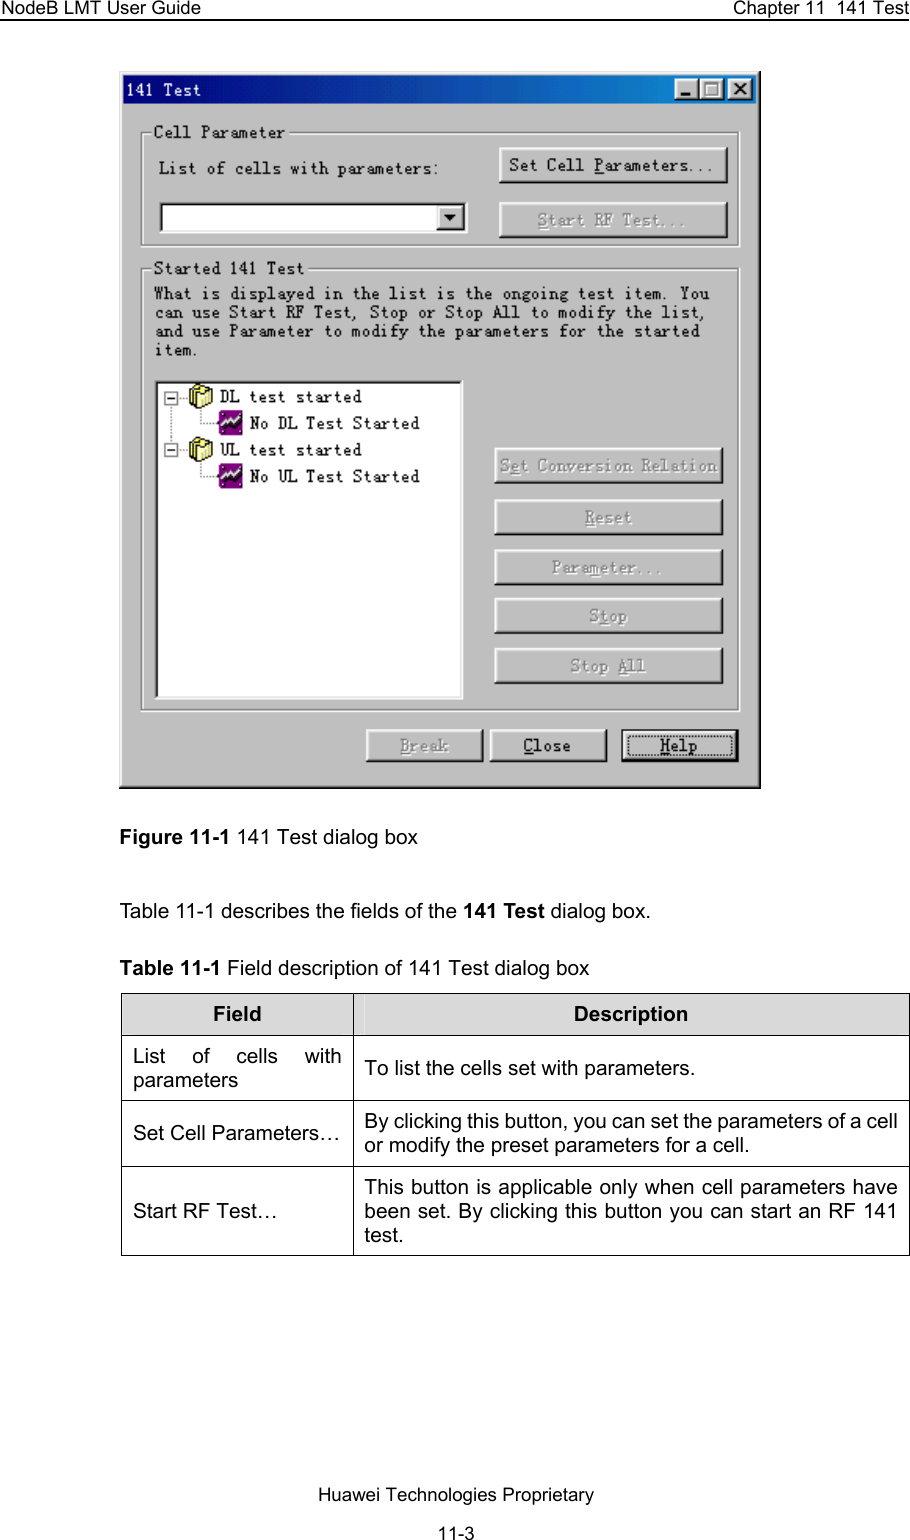 NodeB LMT User Guide  Chapter 11  141 Test  Figure 11-1 141 Test dialog box Table 11-1 describes the fields of the 141 Test dialog box. Table 11-1 Field description of 141 Test dialog box  Field   Description  List of cells with parameters  To list the cells set with parameters.  Set Cell Parameters…  By clicking this button, you can set the parameters of a cell or modify the preset parameters for a cell. Start RF Test… This button is applicable only when cell parameters have been set. By clicking this button you can start an RF 141 test. Huawei Technologies Proprietary 11-3 